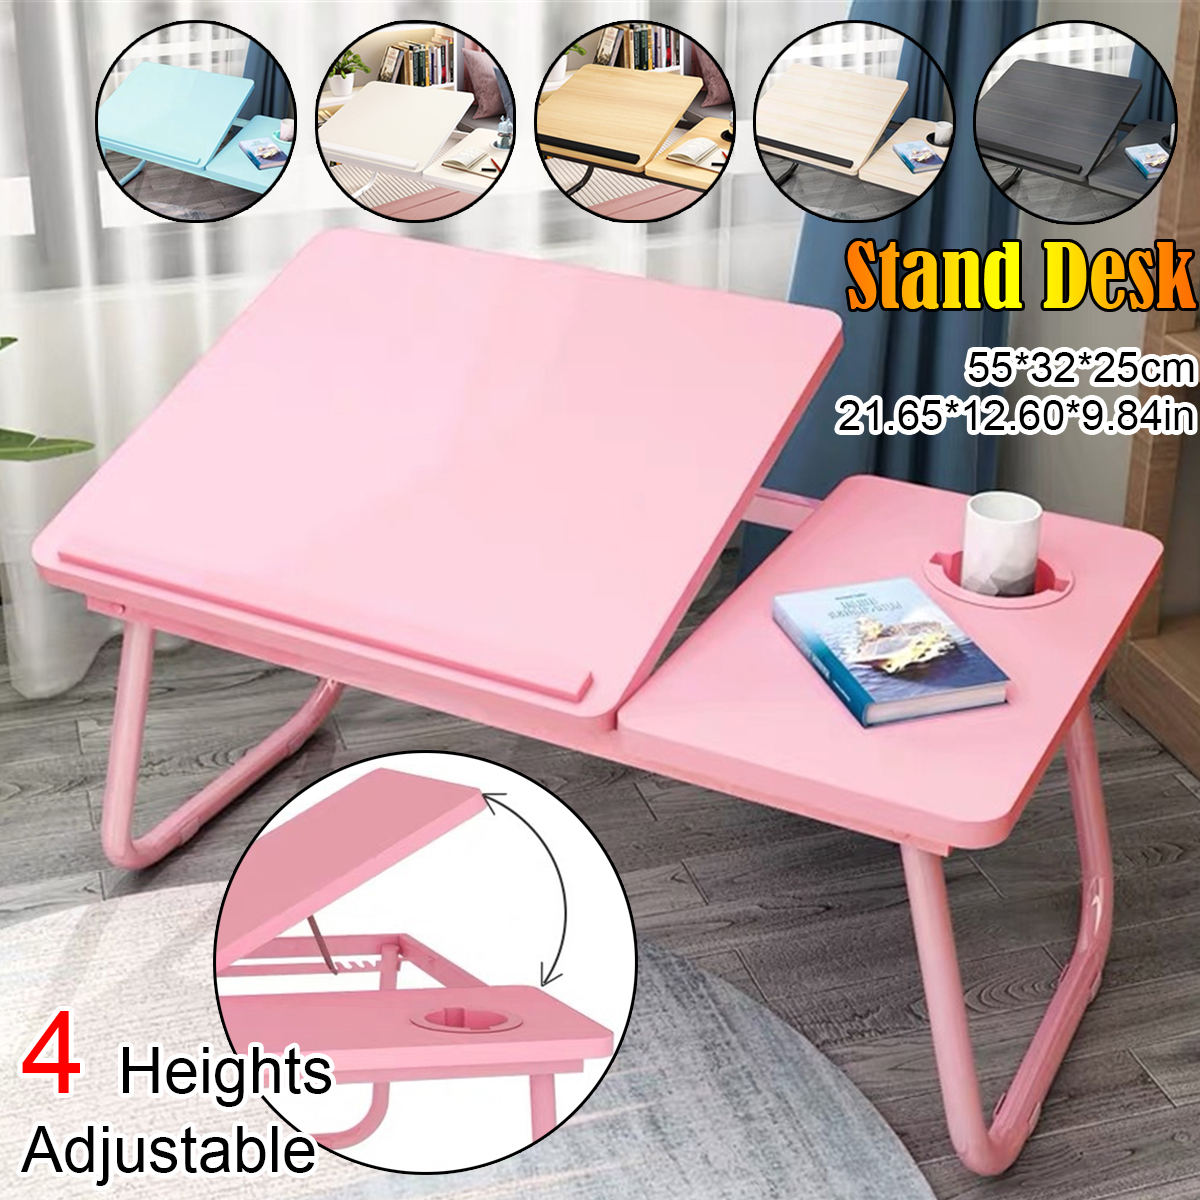 Liftable-Folding-Computer-Desk-Laptop-Stand-4-Heights-Adjustable-with-Cup-Holder-Lap-Bed-Table-Tray--1783876-1